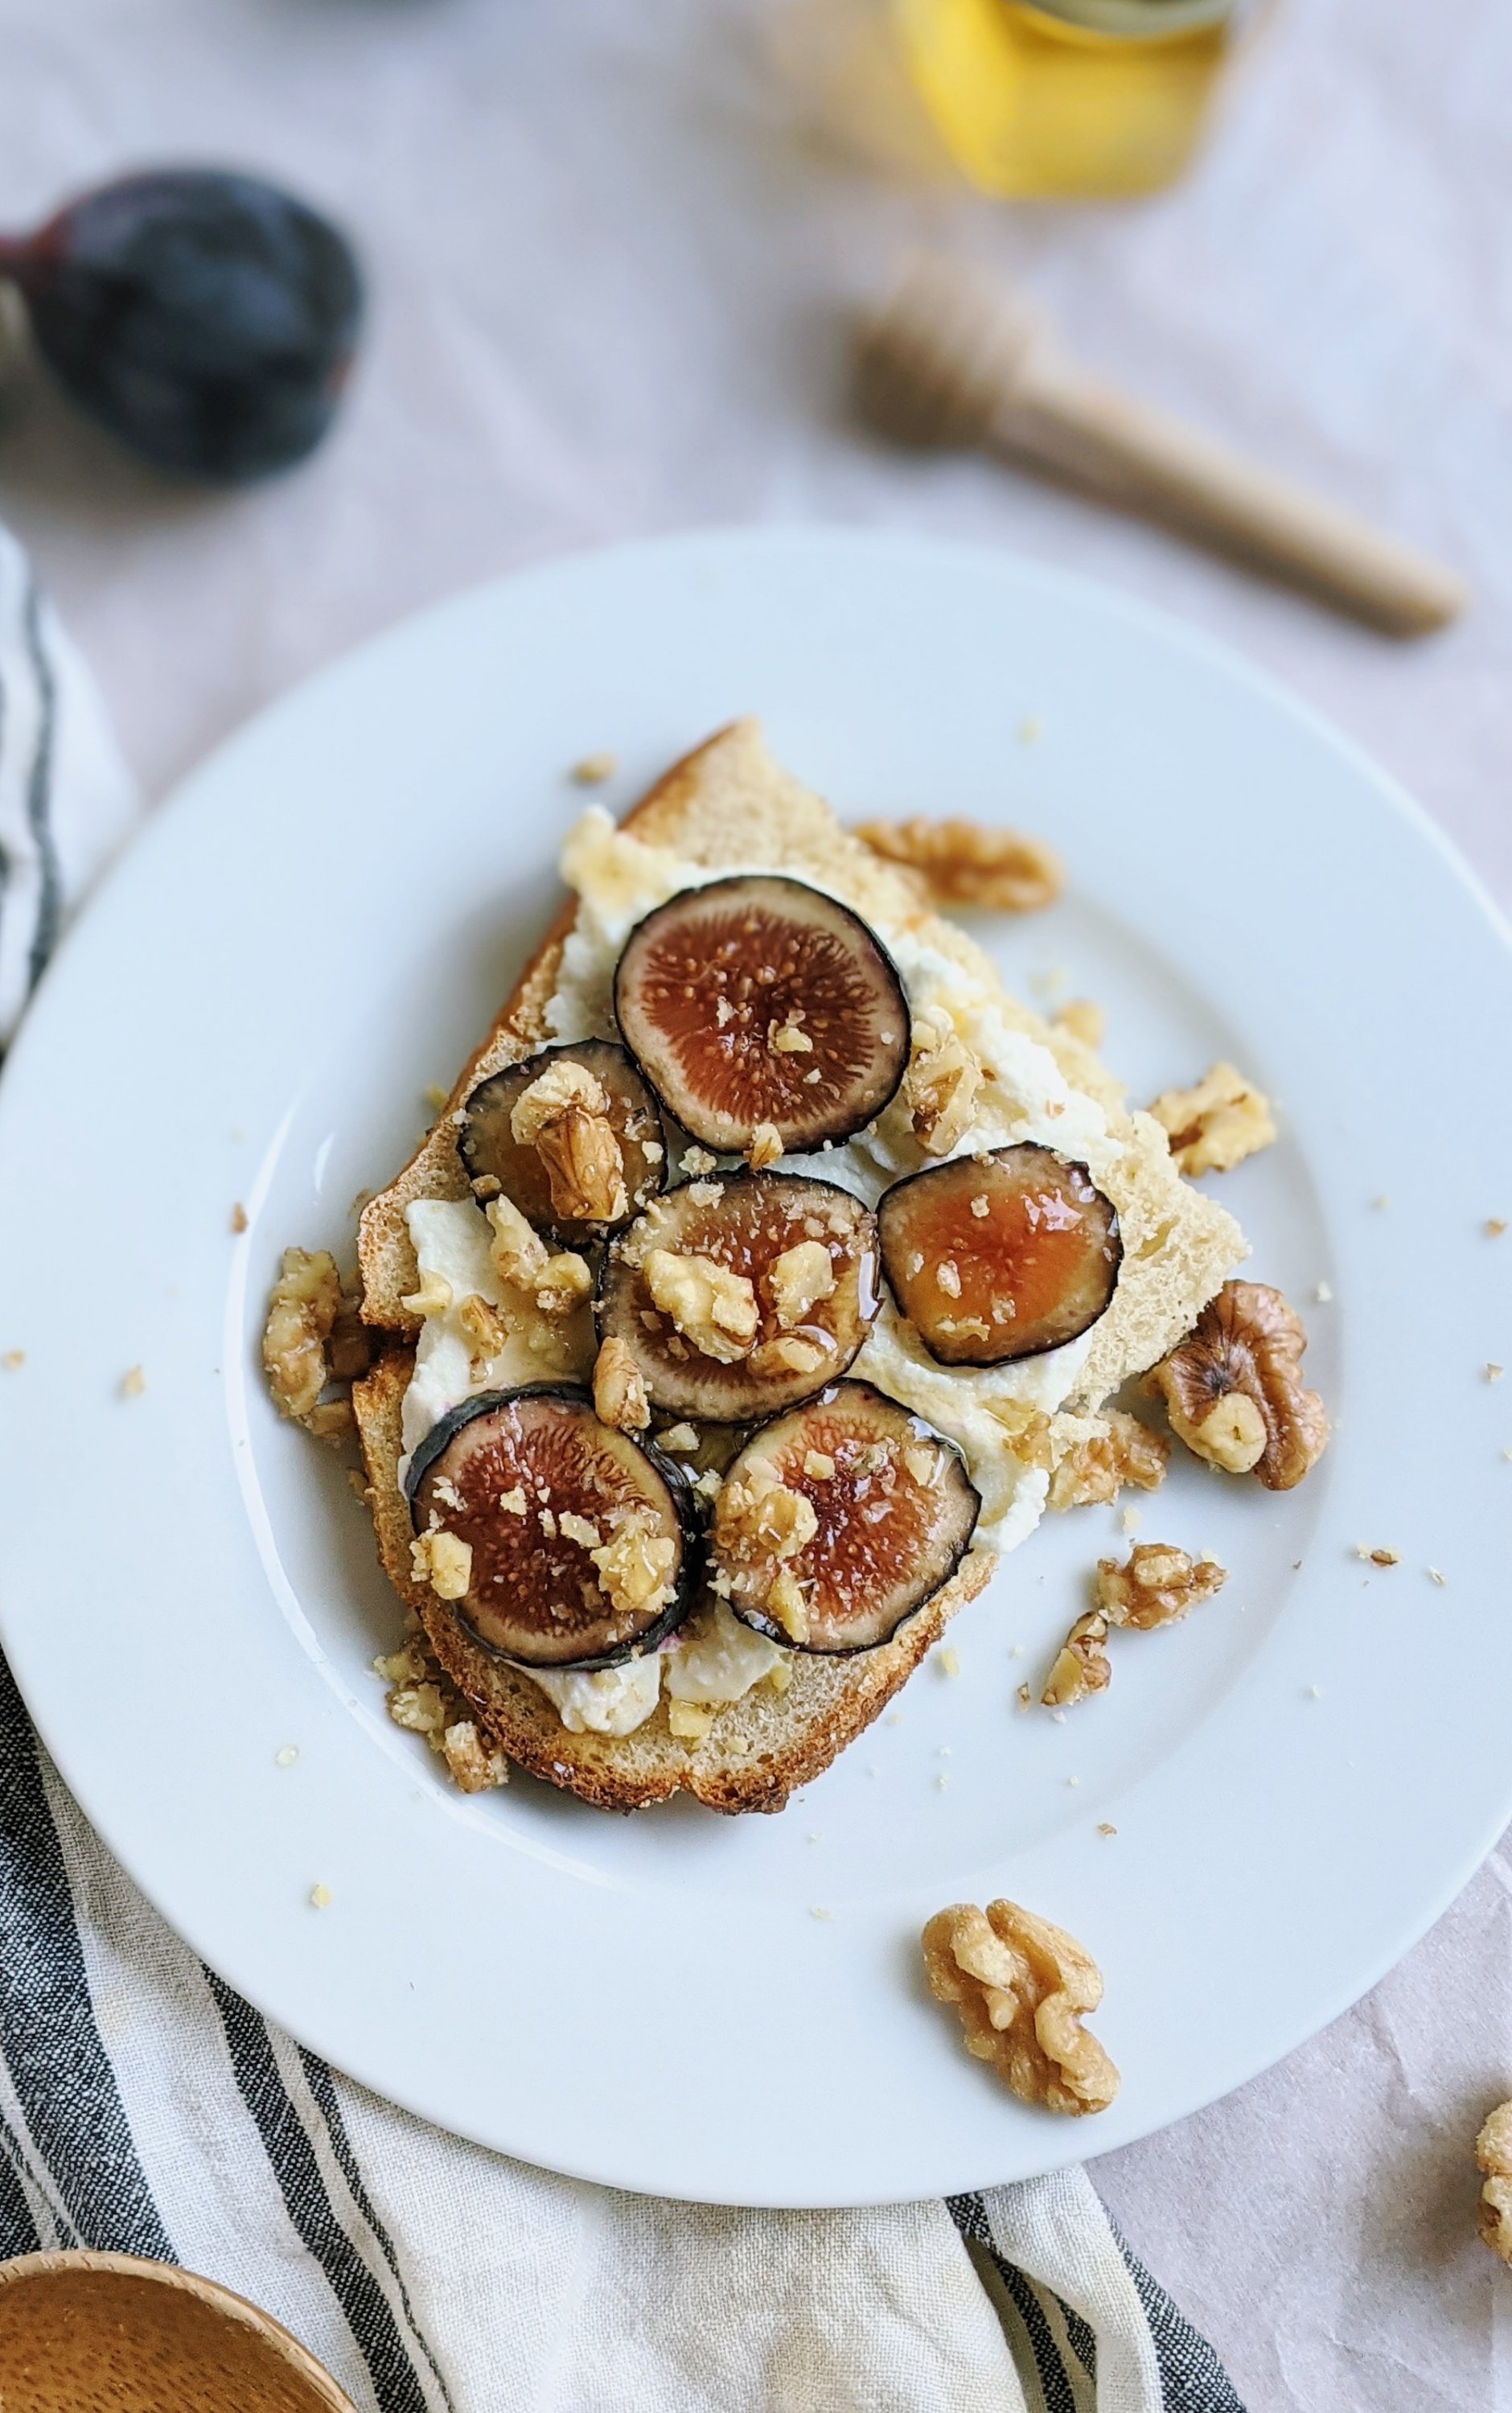 gluten free ricotta toast with figs recipe plant based breakfast ideas fancy brunch recipes for guests healthy meatless brunch ideas fig recipes on toast with honey